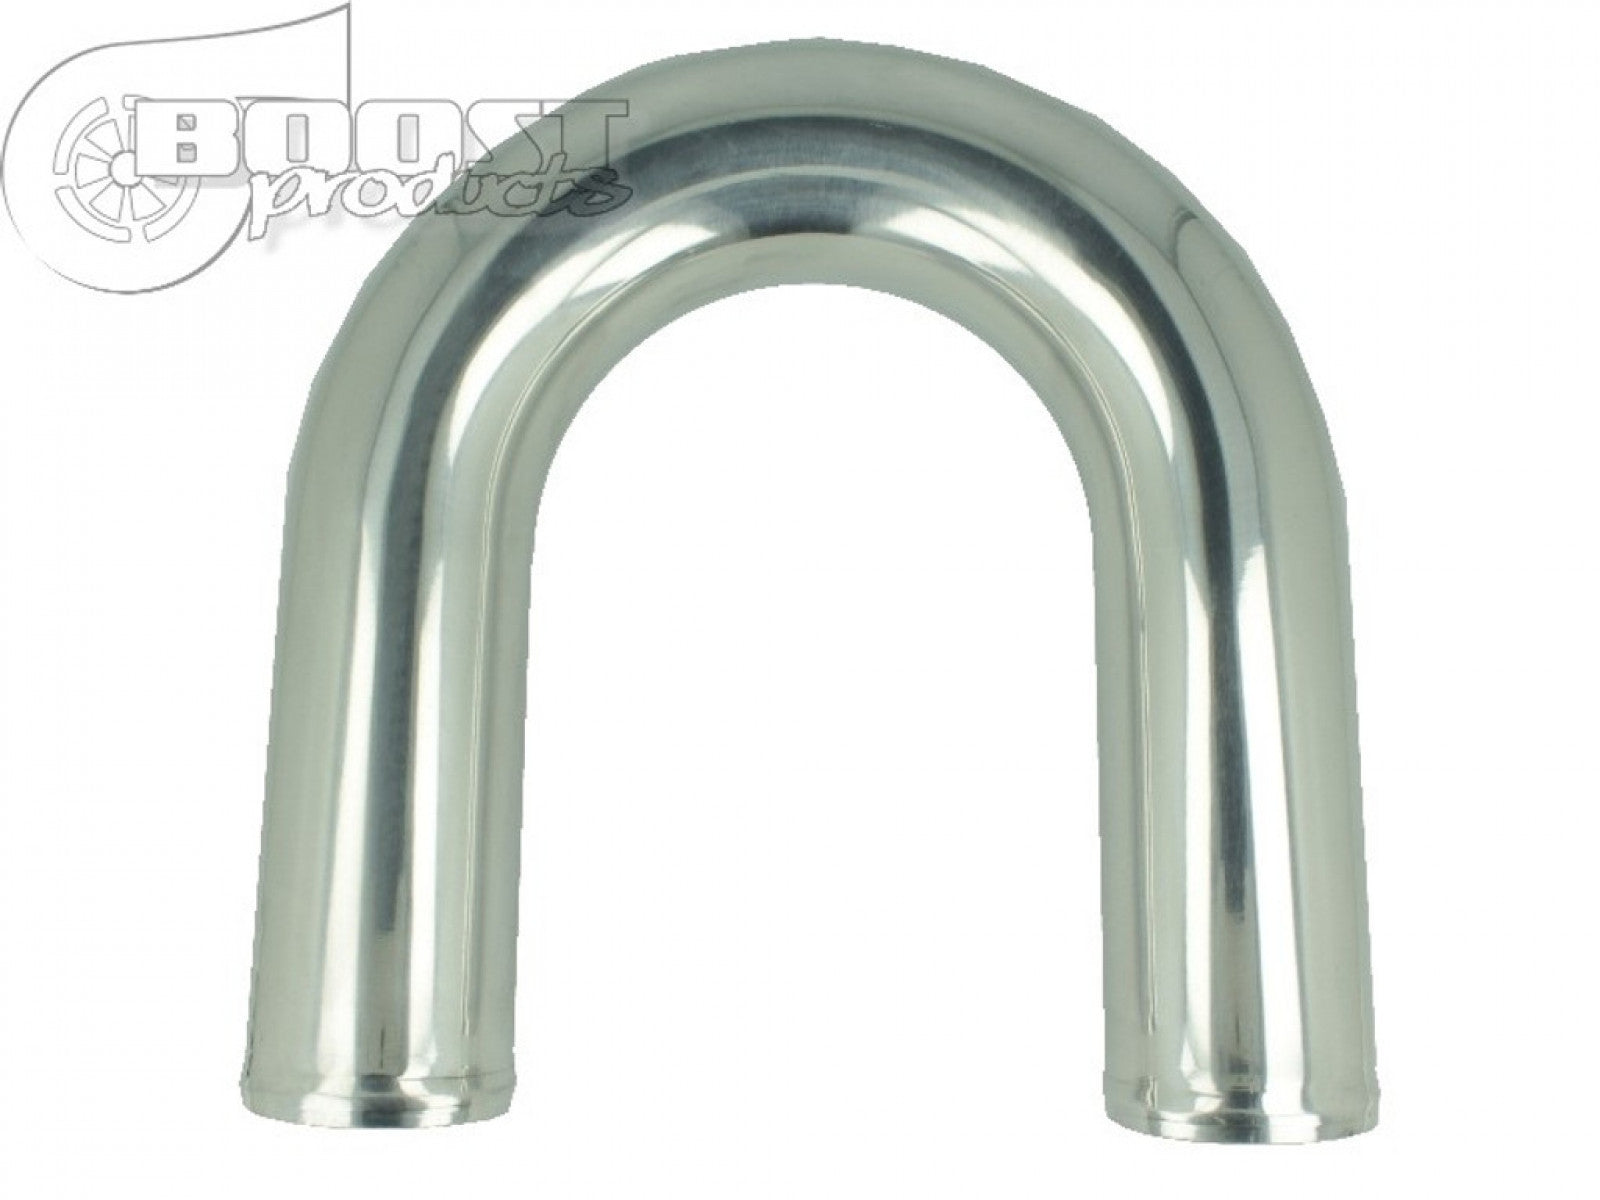 BOOST Products Aluminum Elbow 180 Degrees with 80mm (3-1/8") OD, Mandrel Bent, Polished